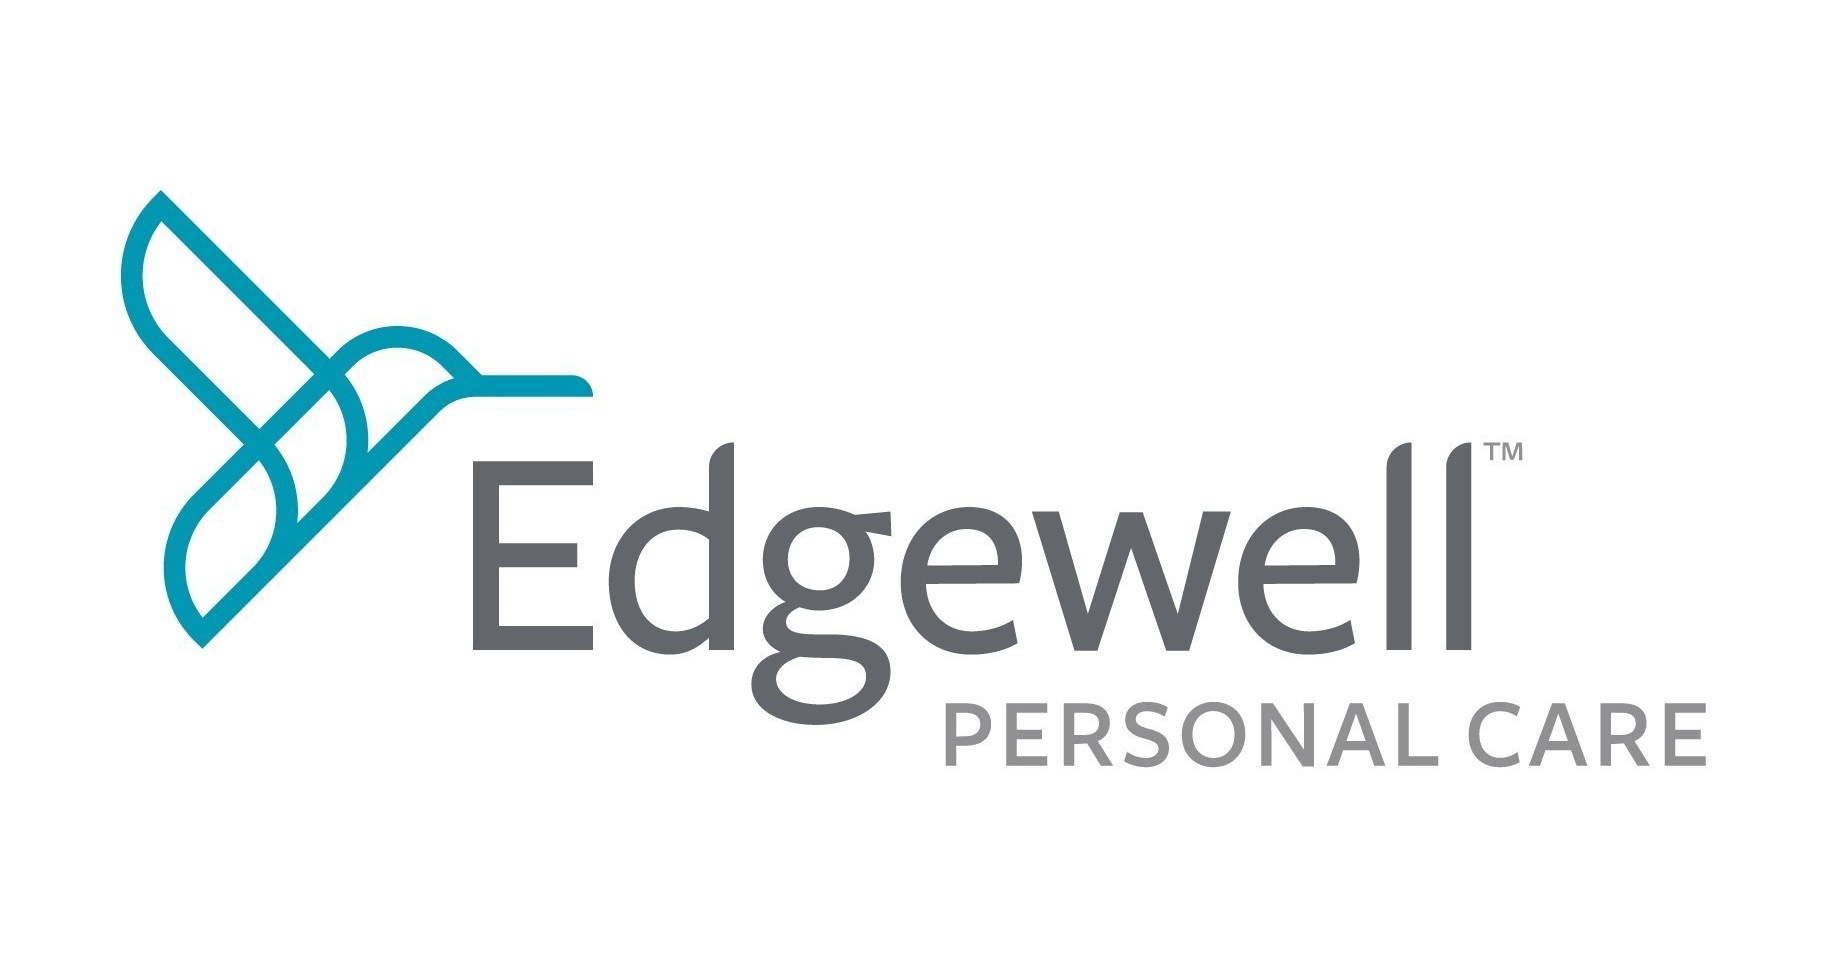 Edgewell Personal Care Streamlines Leadership and Organizational Structure to Support Company Growth